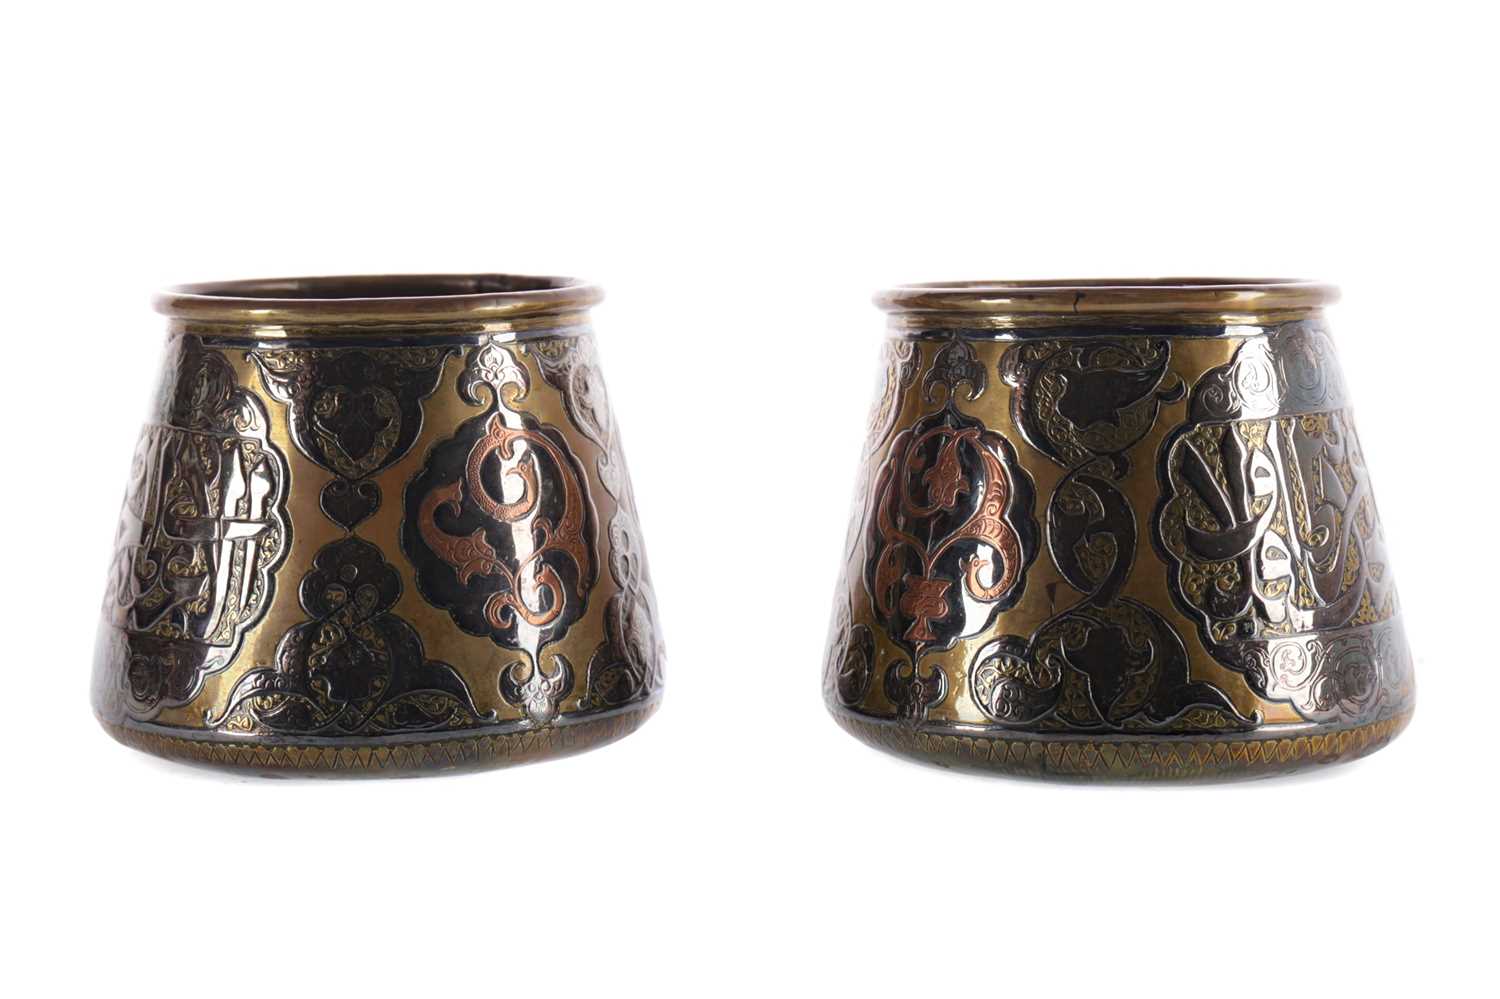 Lot 736 - A PAIR OF EASTERN BRASS, COPPER AND SILVER INLAID FERN POTS